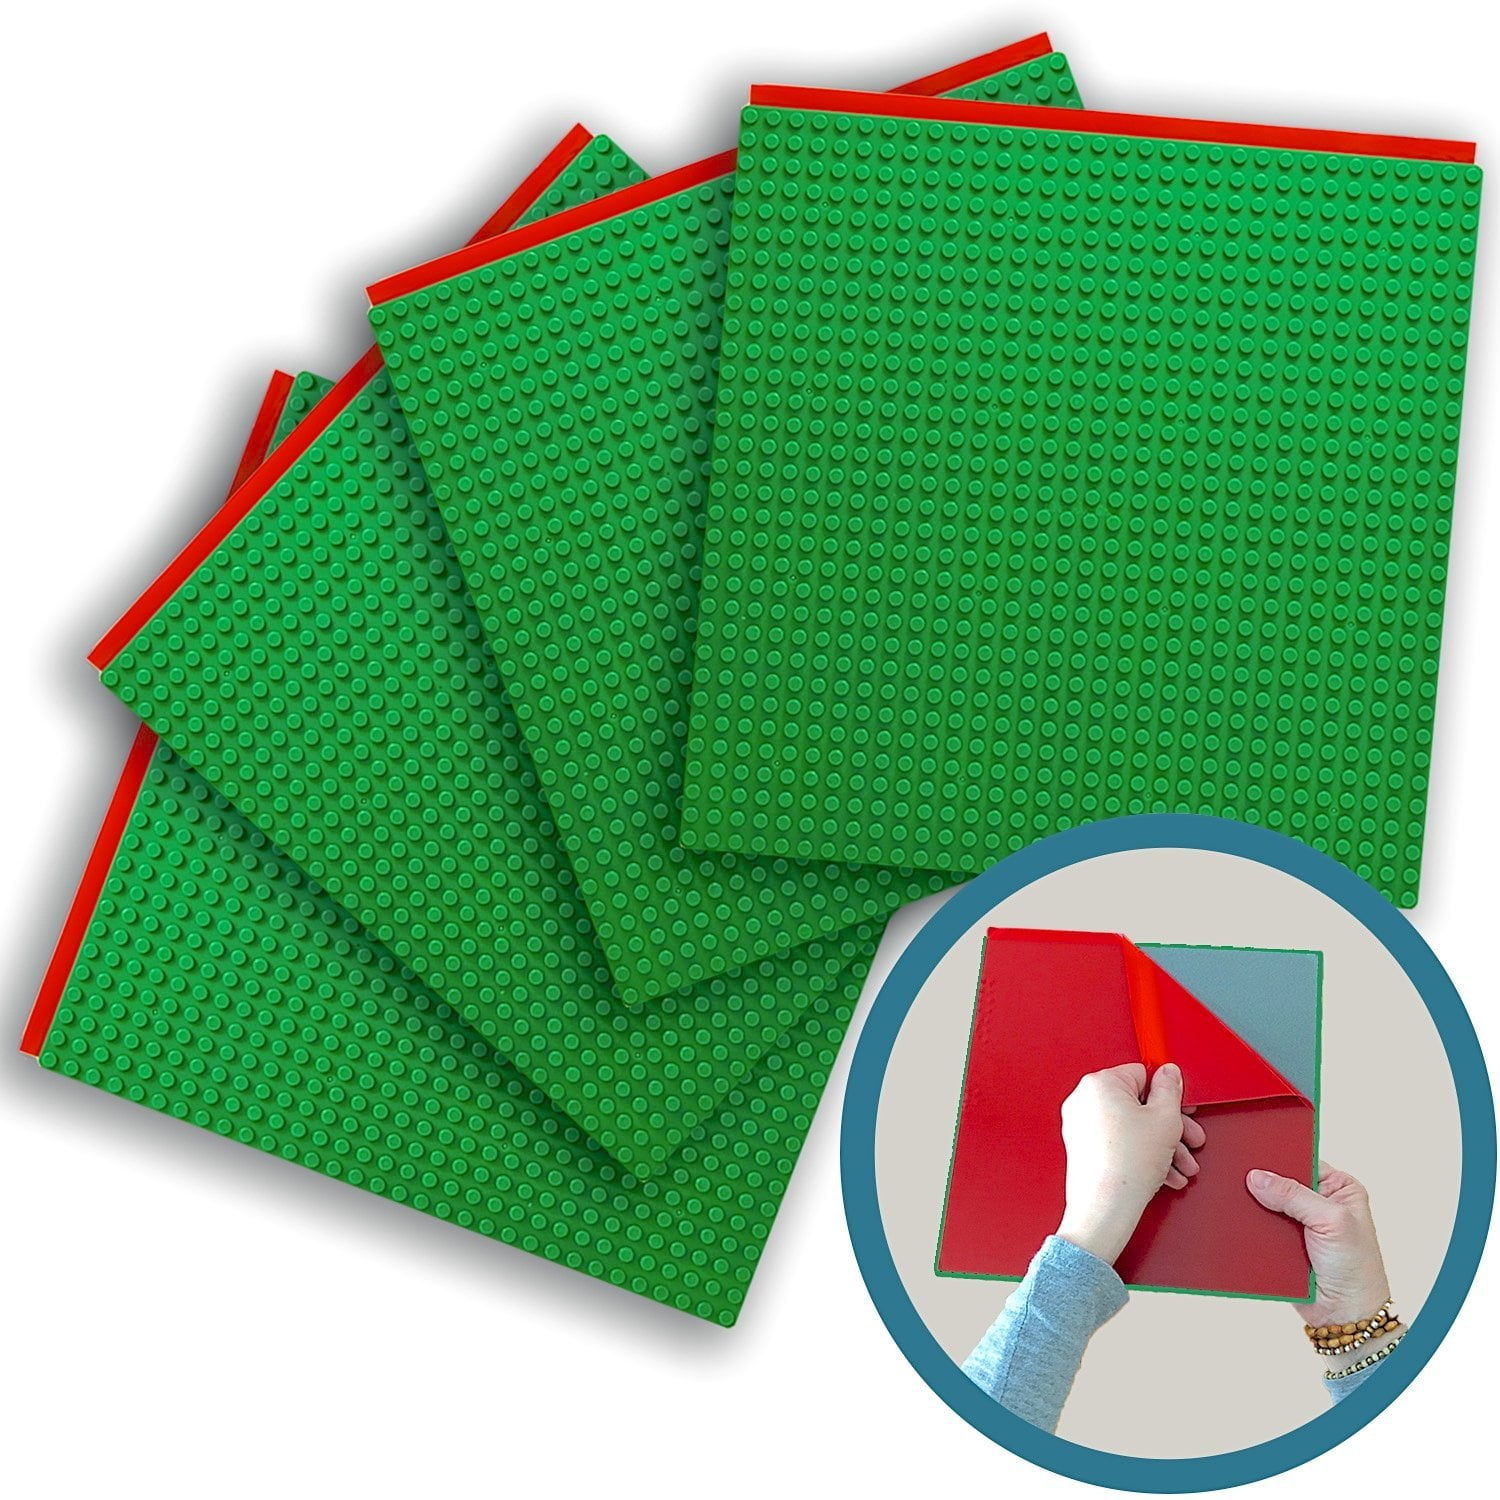 10 Inch x 10 Inch Baseplate Green 4 Pack Compatible with All Major Brands Peel-and-Stick Baseplates 